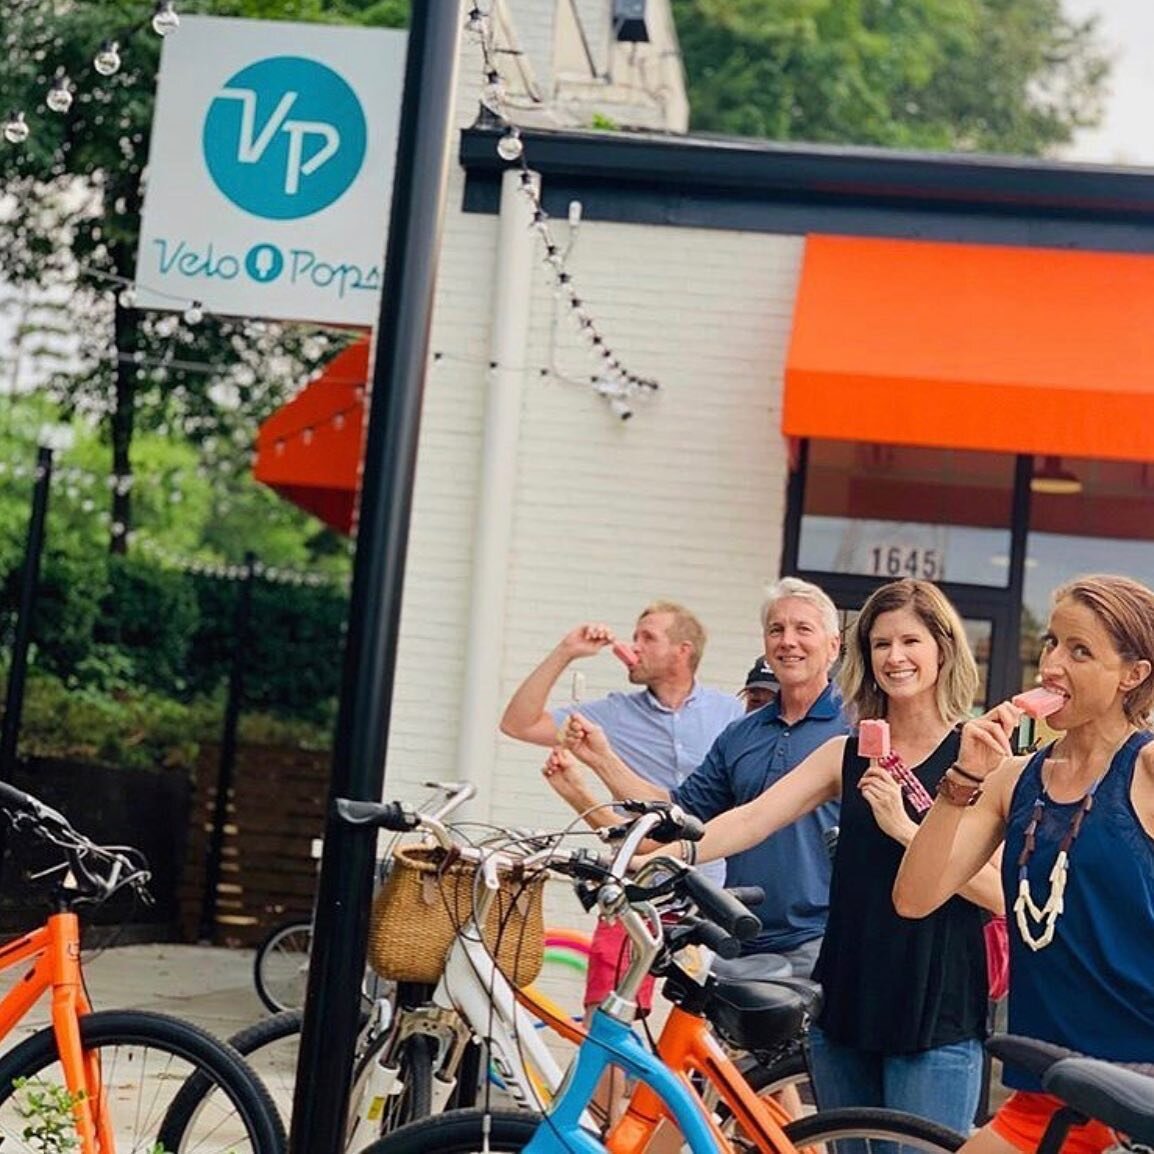 🎵 Here comes the sun...Do do do do 🎵 

Our patio is open at 1:30 today - come soak up some sunshine! 

#velopops #velopopsclt #hellovelo #sunshine #herecomesthesun #yay #finally #sunshineandapop